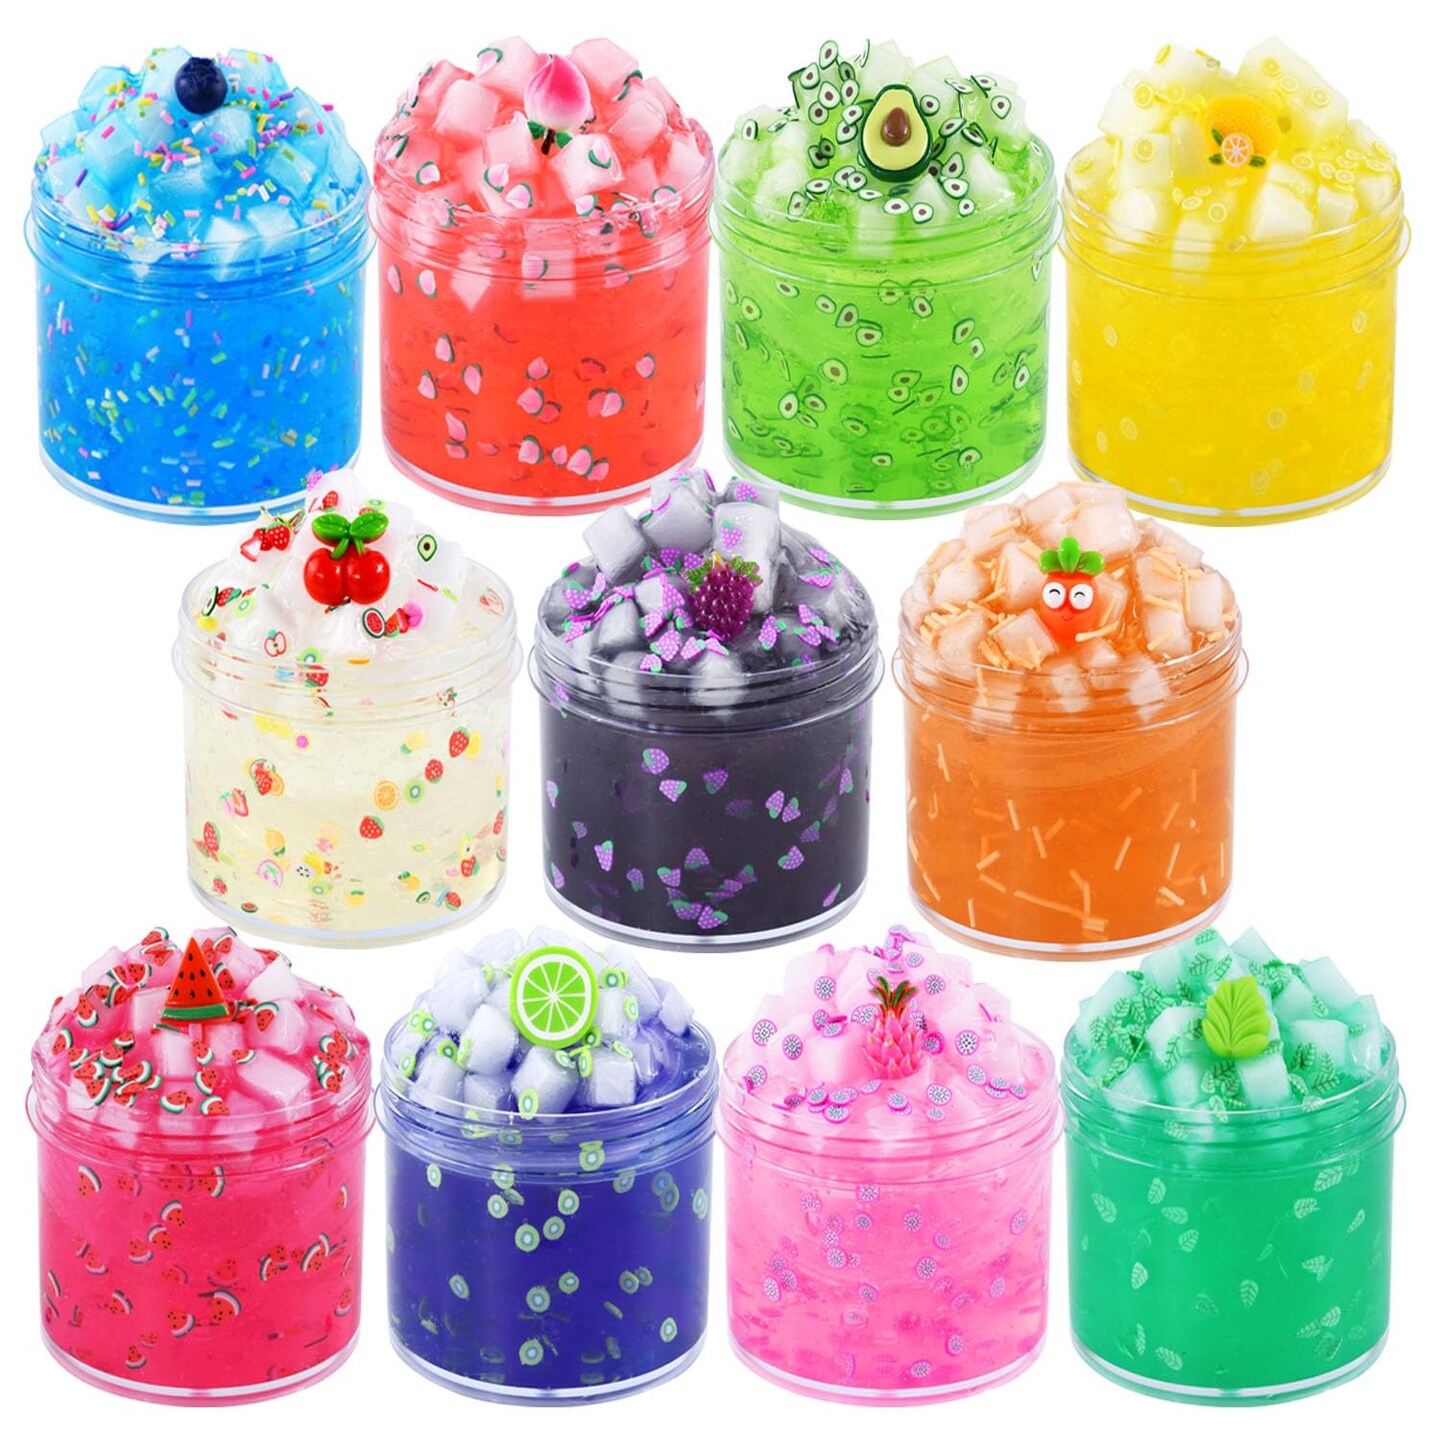 Jelly Cube Crunchy Crystal Slime Kit-11 Pack,Super Soft and Non-Sticky, Fruit Themed Party Toy to Slime,Rich Colors Stress Relief Toy for Girls and Boys